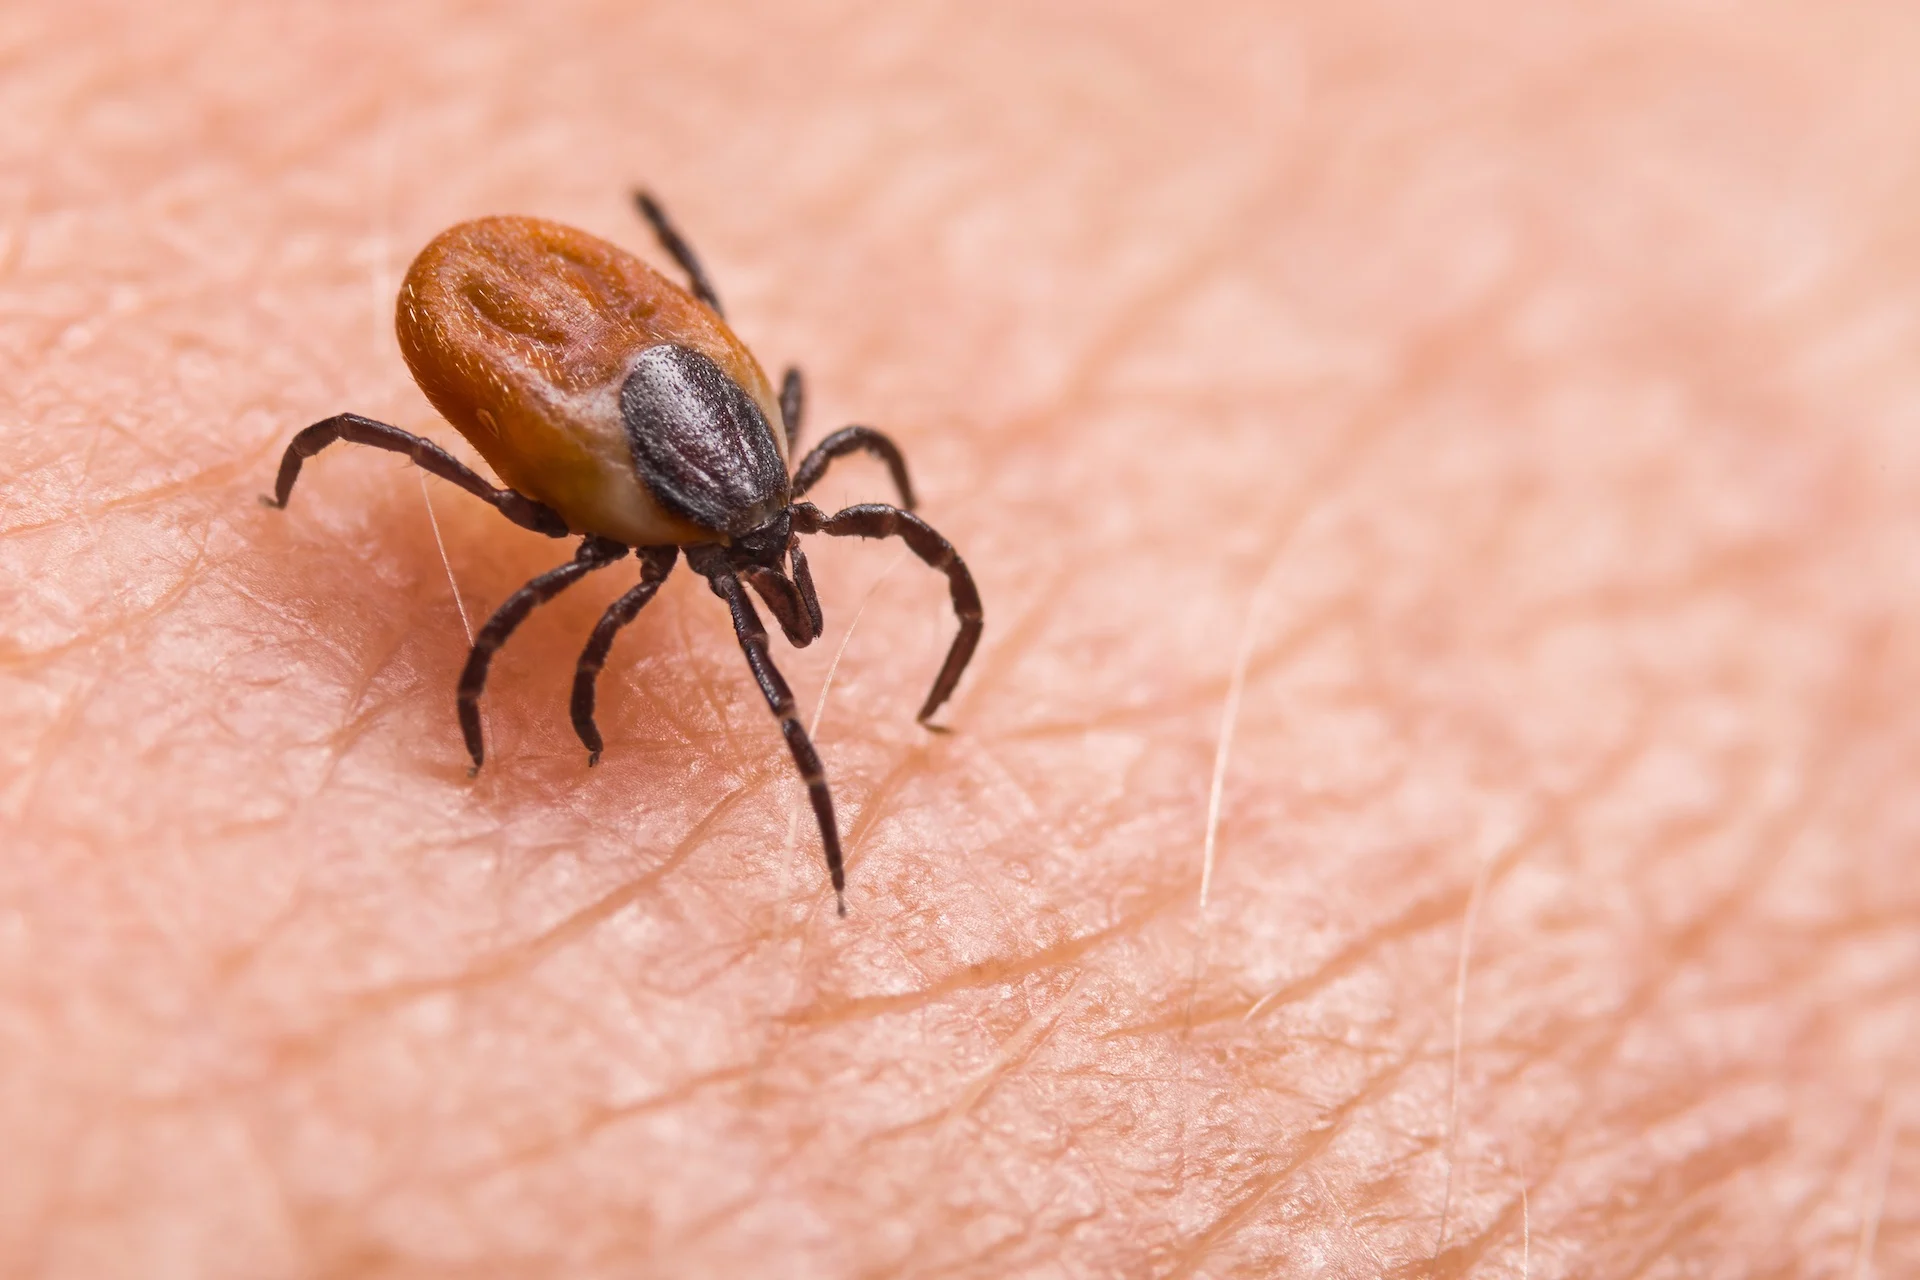 Bitten by a tick? Here's the trick to handling it in a safe manner